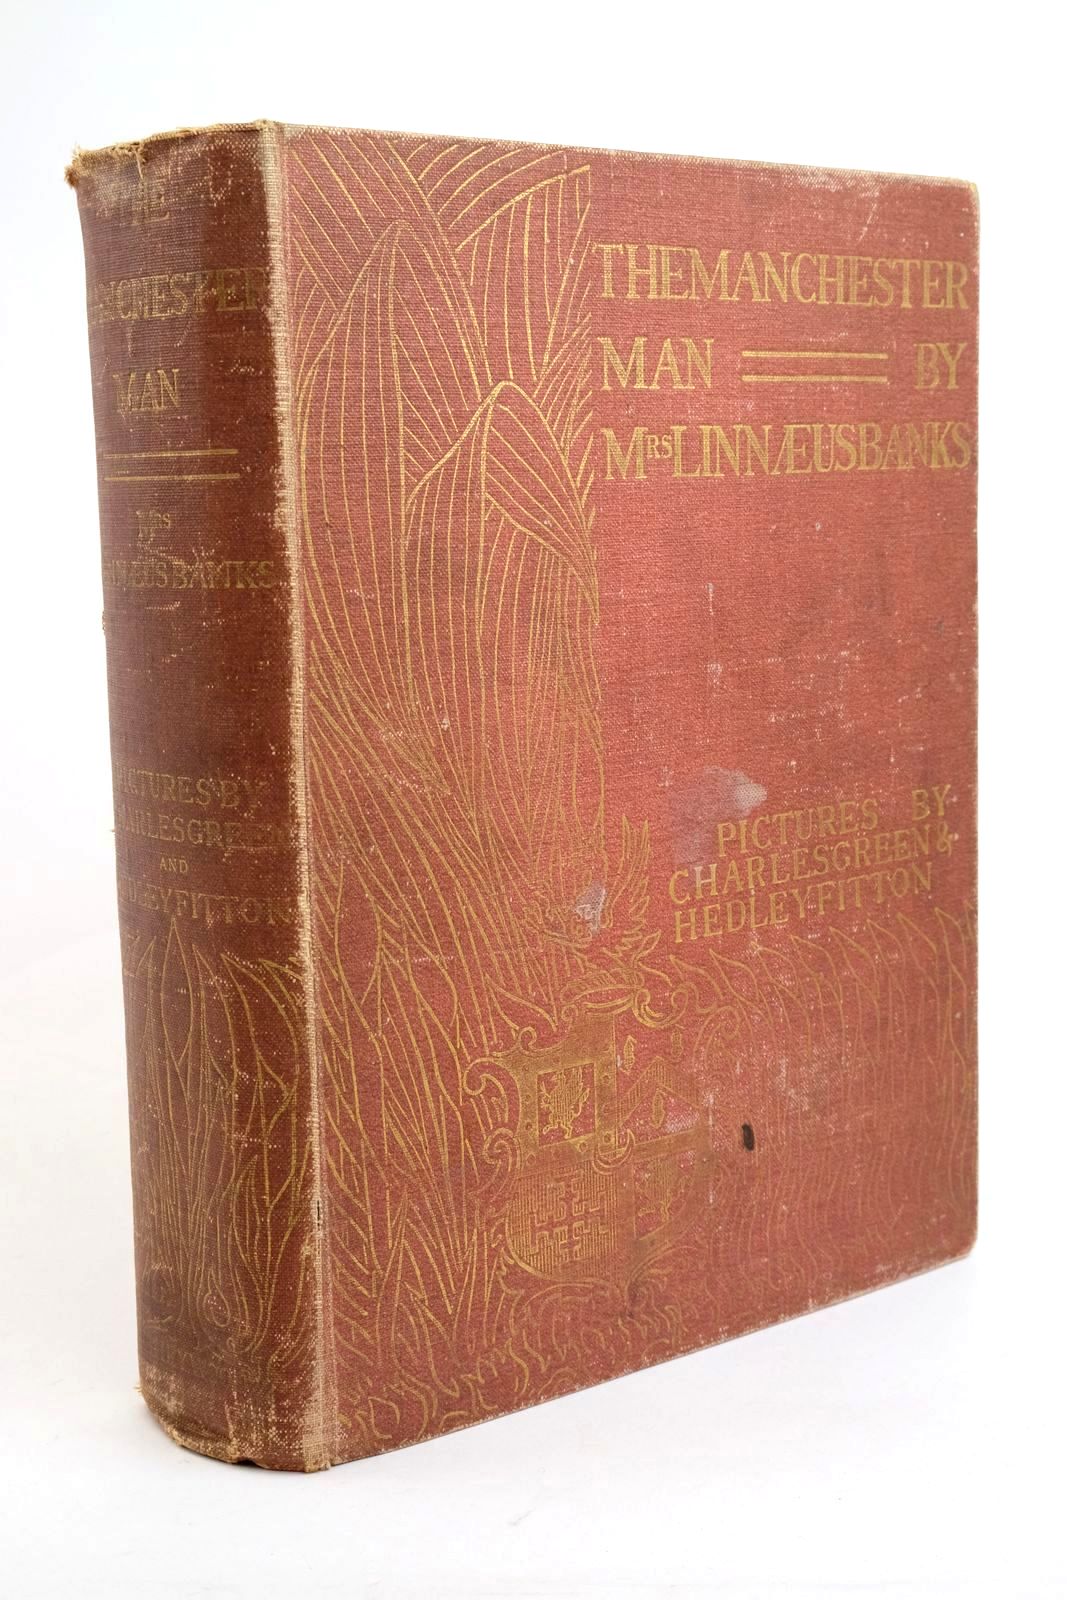 Photo of THE MANCHESTER MAN written by Banks, Isabella illustrated by Green, Charles Fitton, Hedley published by Abel Heywood &amp; Son Ltd. (STOCK CODE: 1322149)  for sale by Stella & Rose's Books